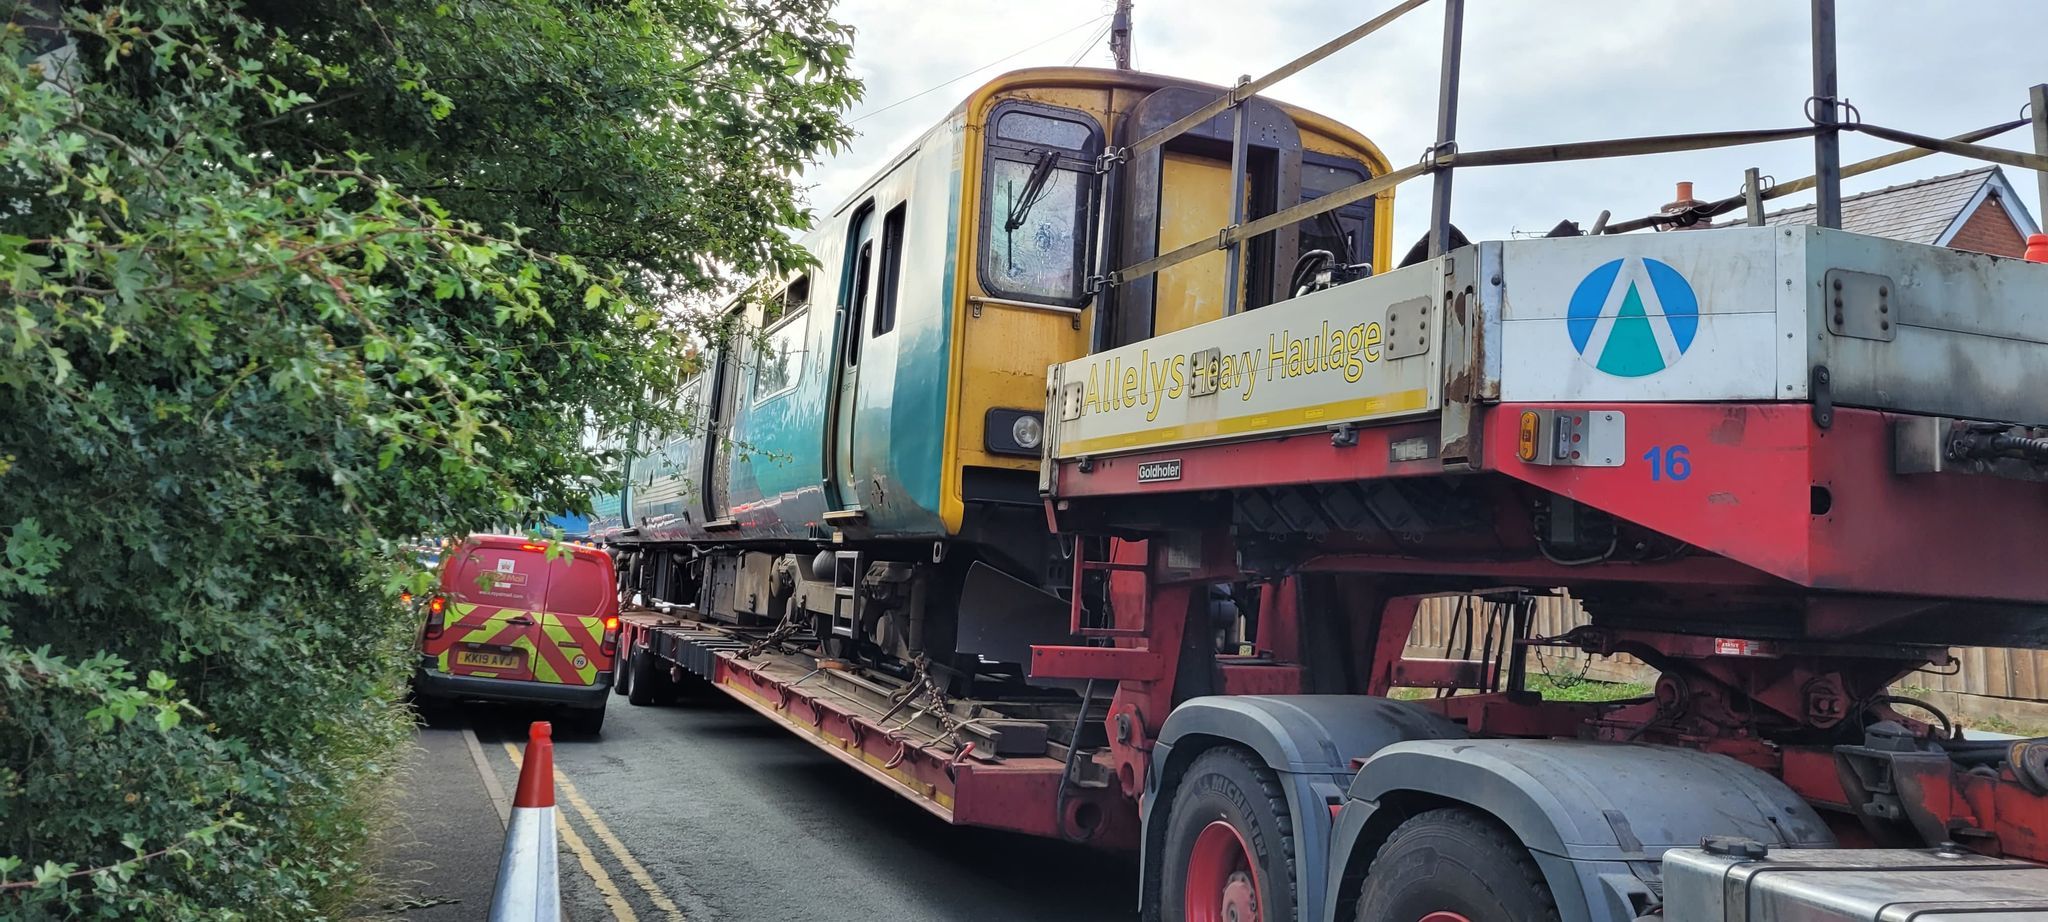 The burnt Transport for Wales train, which crashed into a digger near Craven Arms, were seen on the back of lorries on the A49. Picture: Sam Putterill-Evans